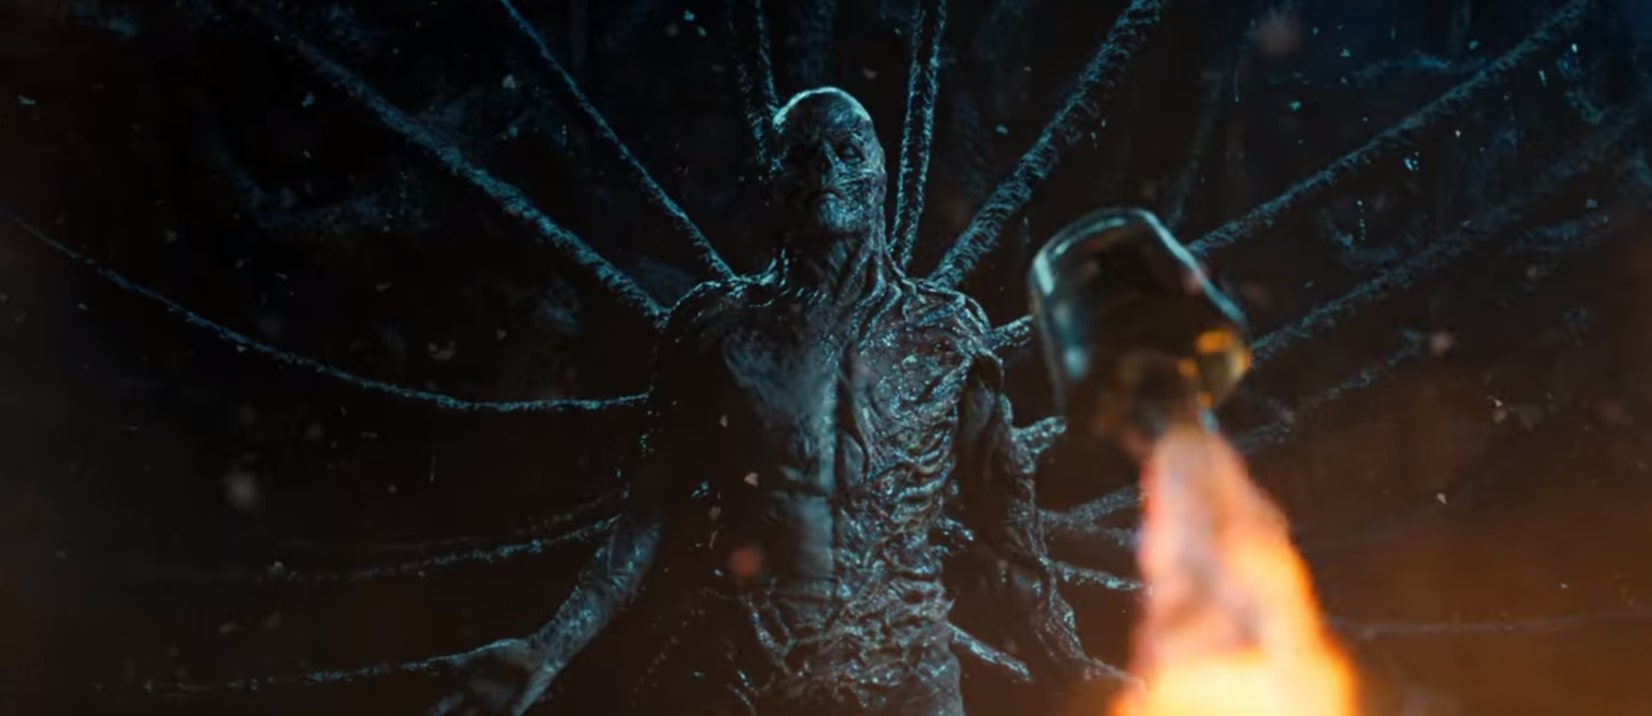 Is Vecna Dead or Alive at the End of Stranger Things? Theories